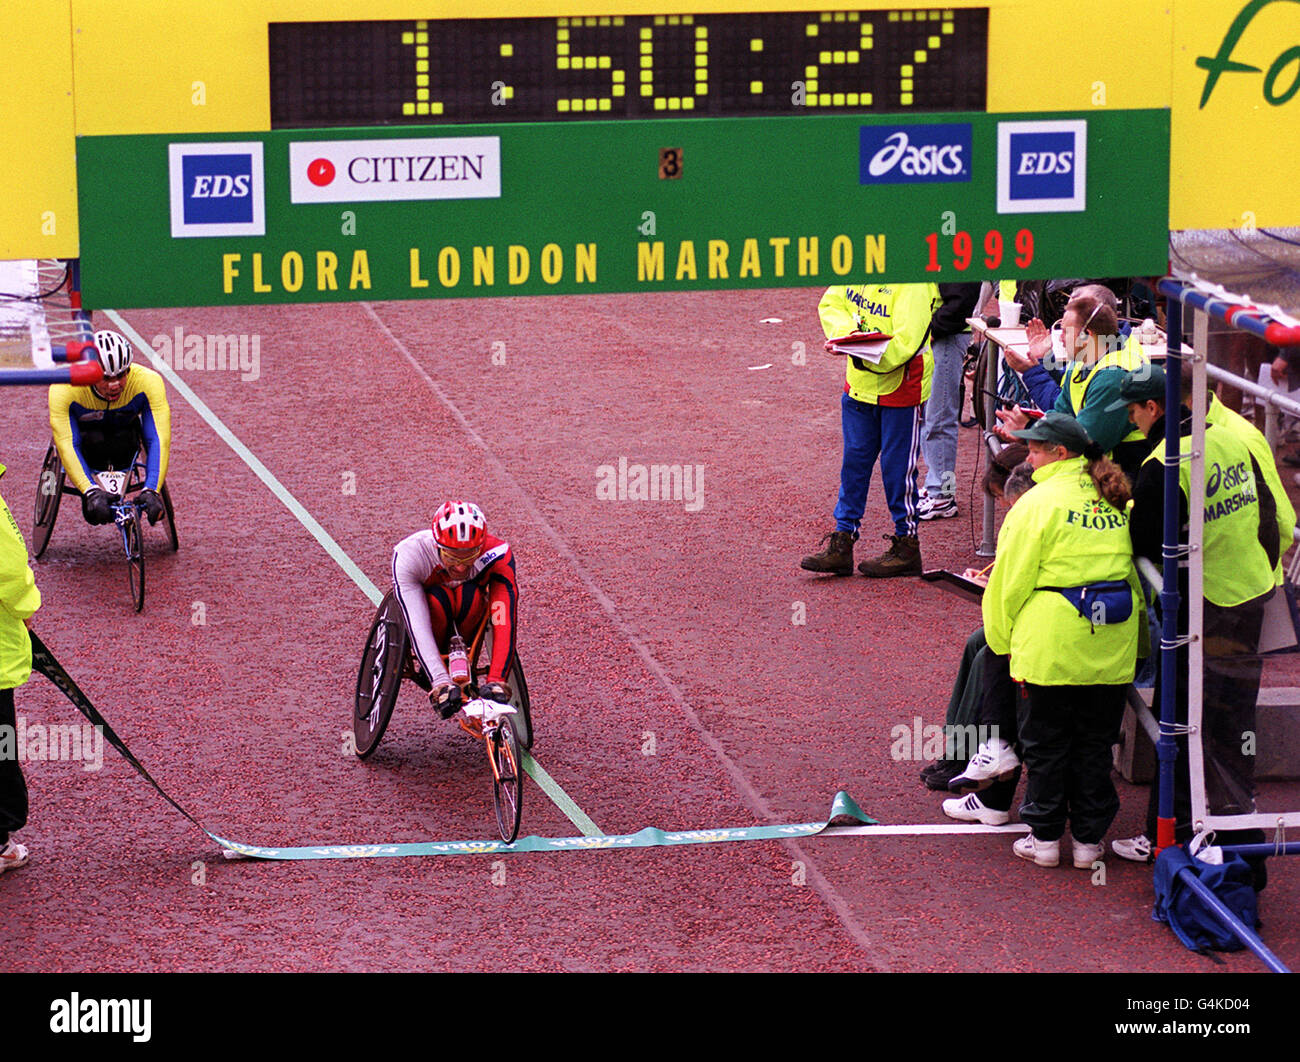 Swiss competitor Heinz Frei crosses the finish line to win the 1999 London Marathon men's wheelchair race, as the readout above records his winning time. Stock Photo